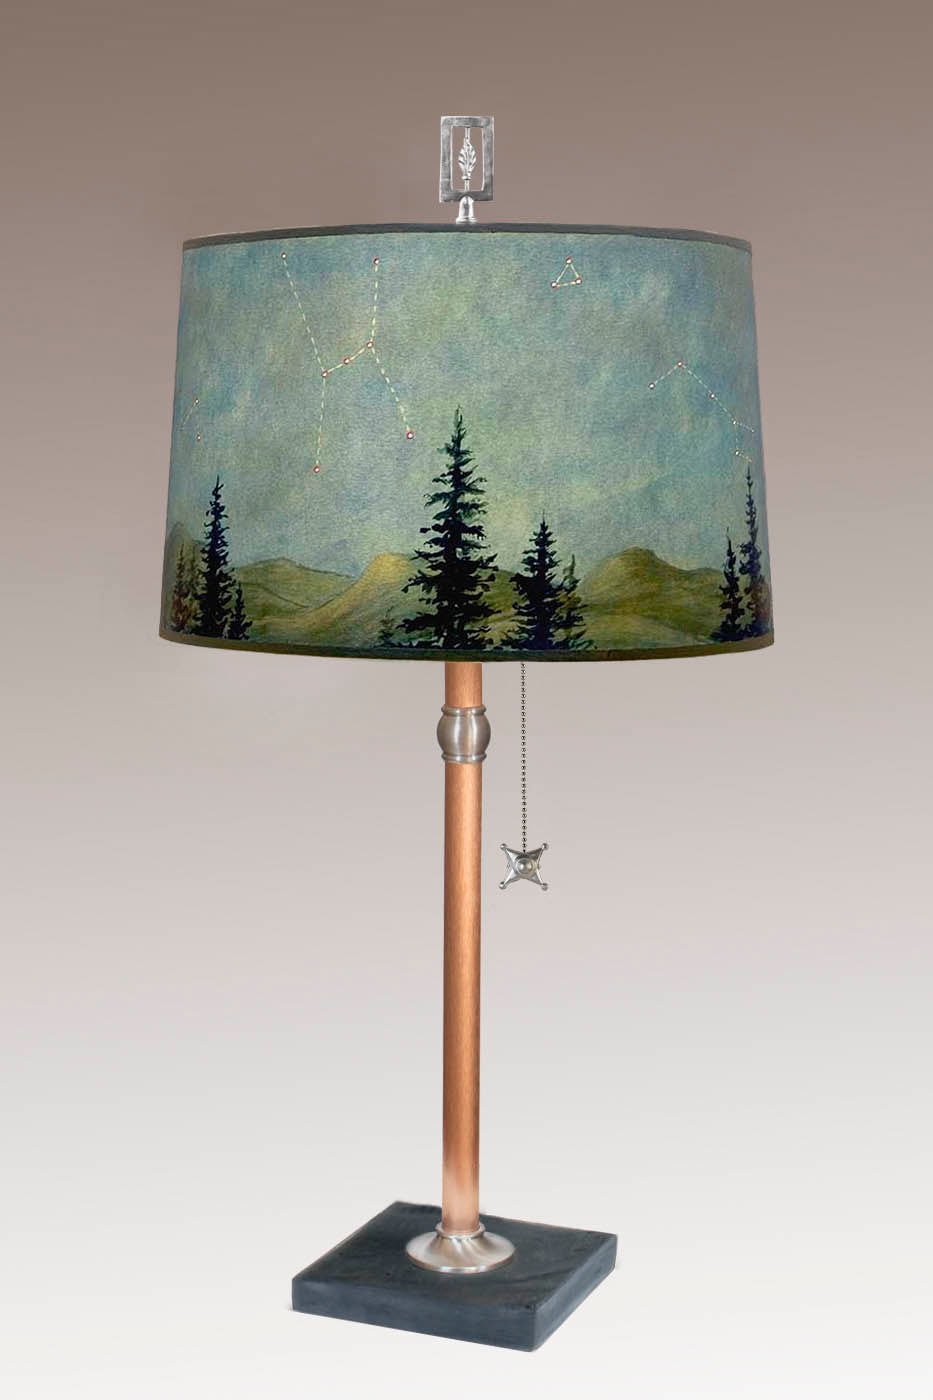 Janna Ugone & Co Table Lamps Copper Table Lamp with Large Drum Shade in Midnight Sky